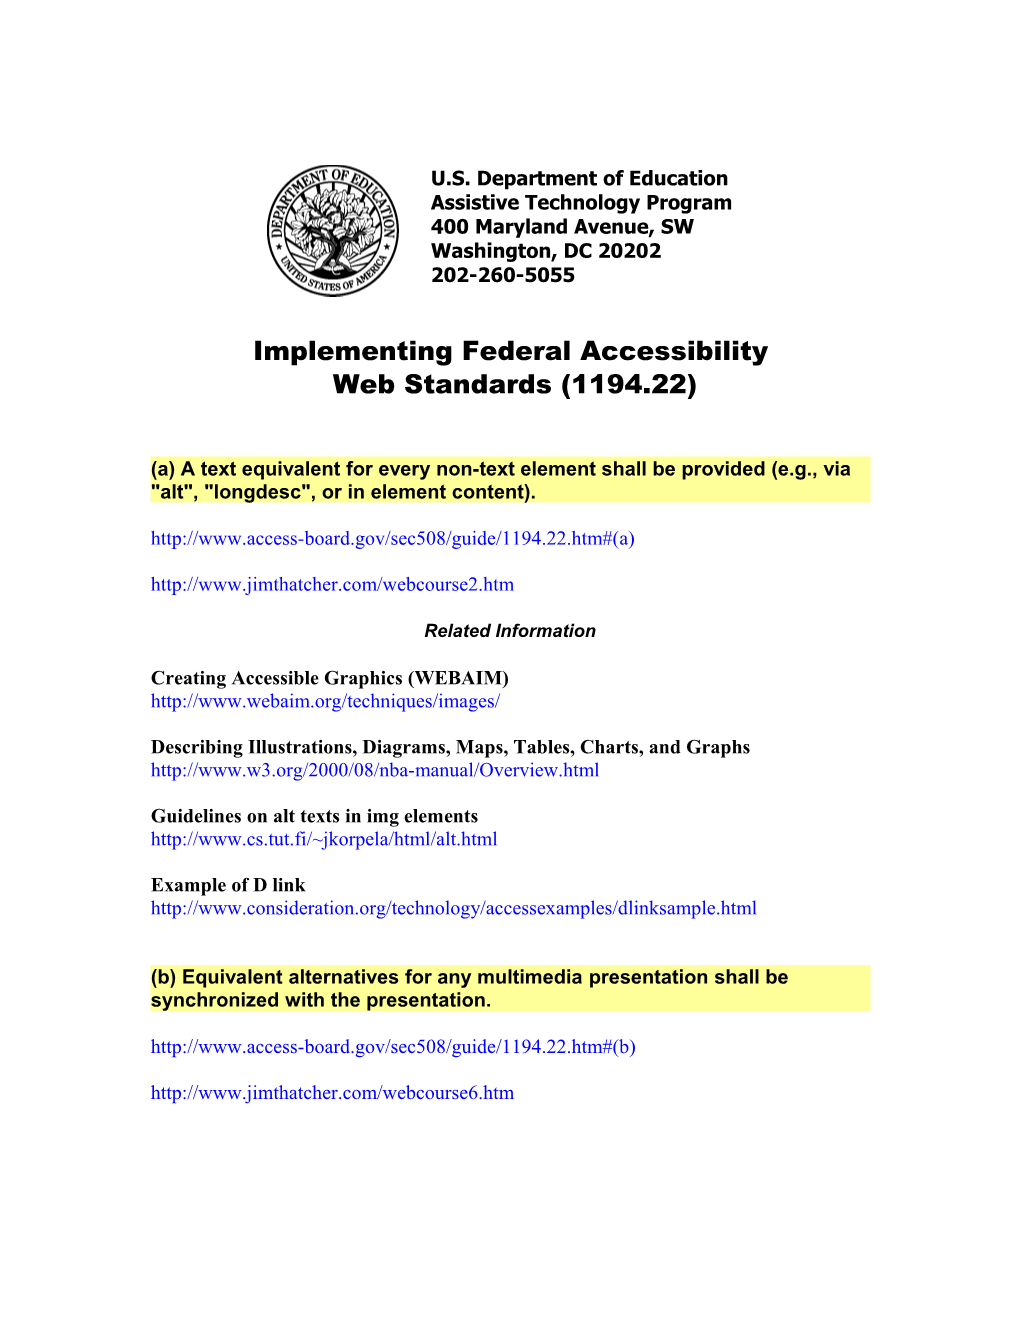 Implementing Federal Accessibility Web Standards (1194.22)